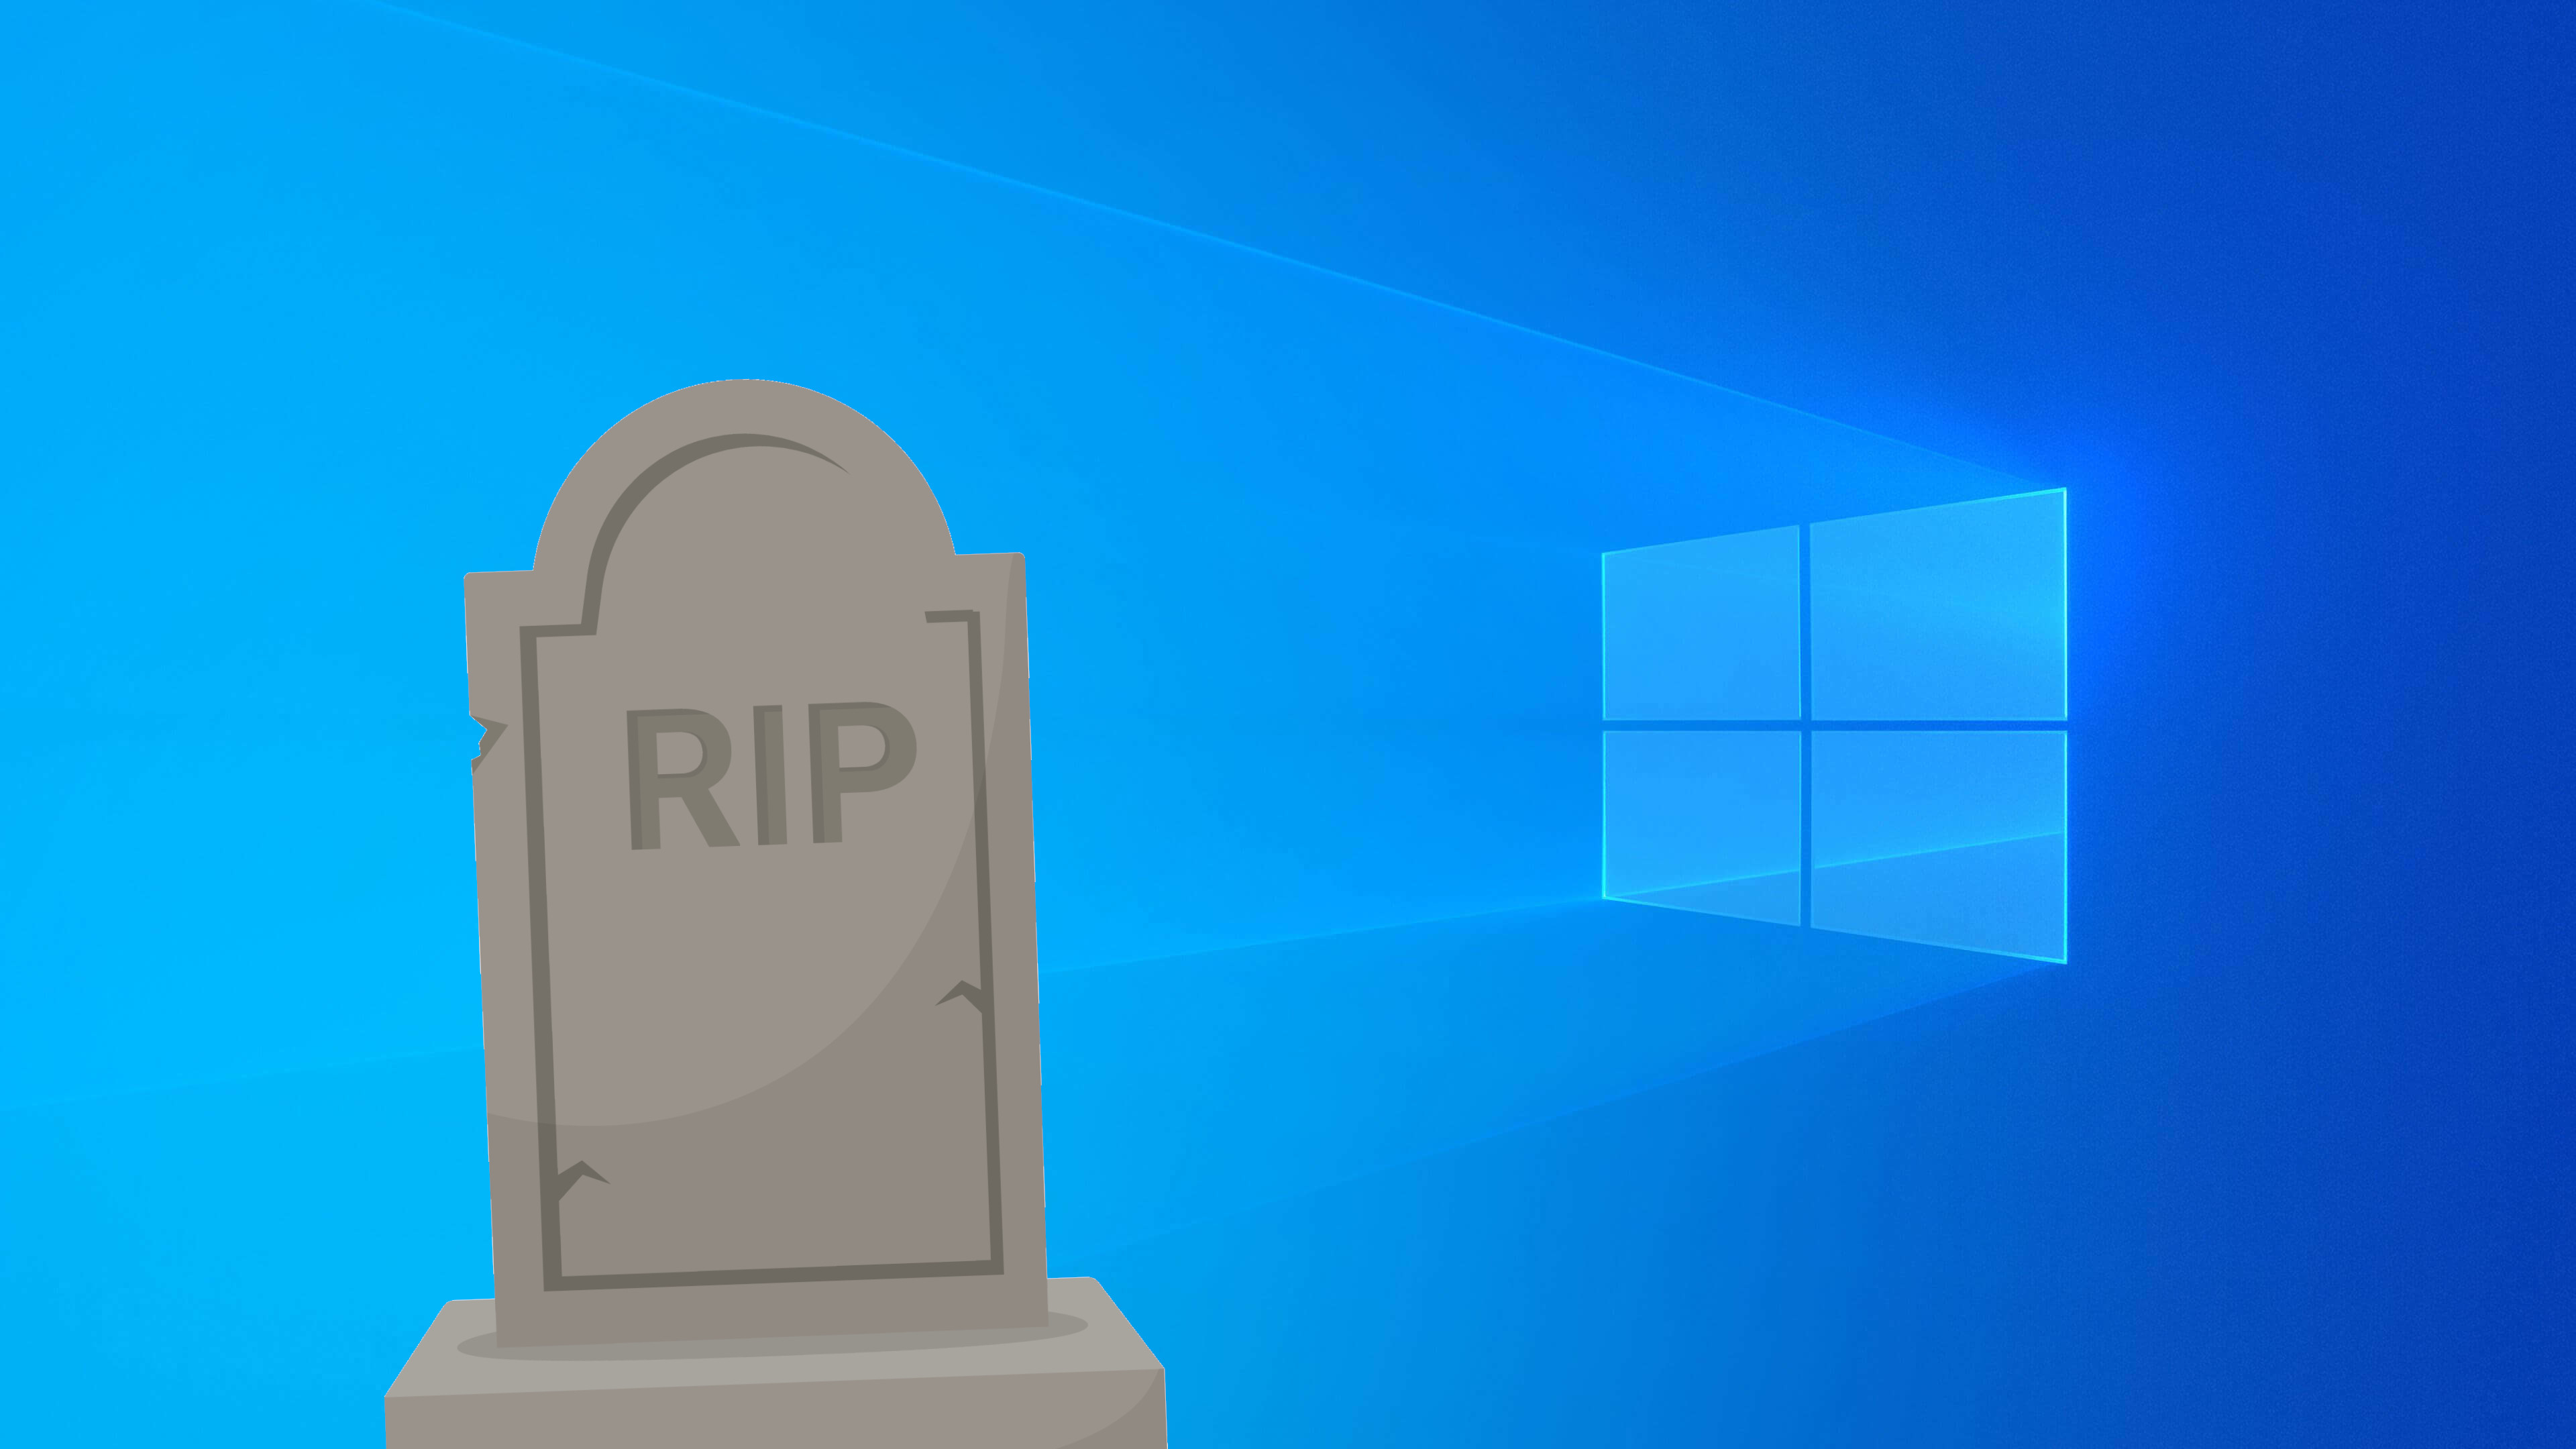 The default Windows 10 desktop wallpaper with a stock image of a gravestone in front of it.